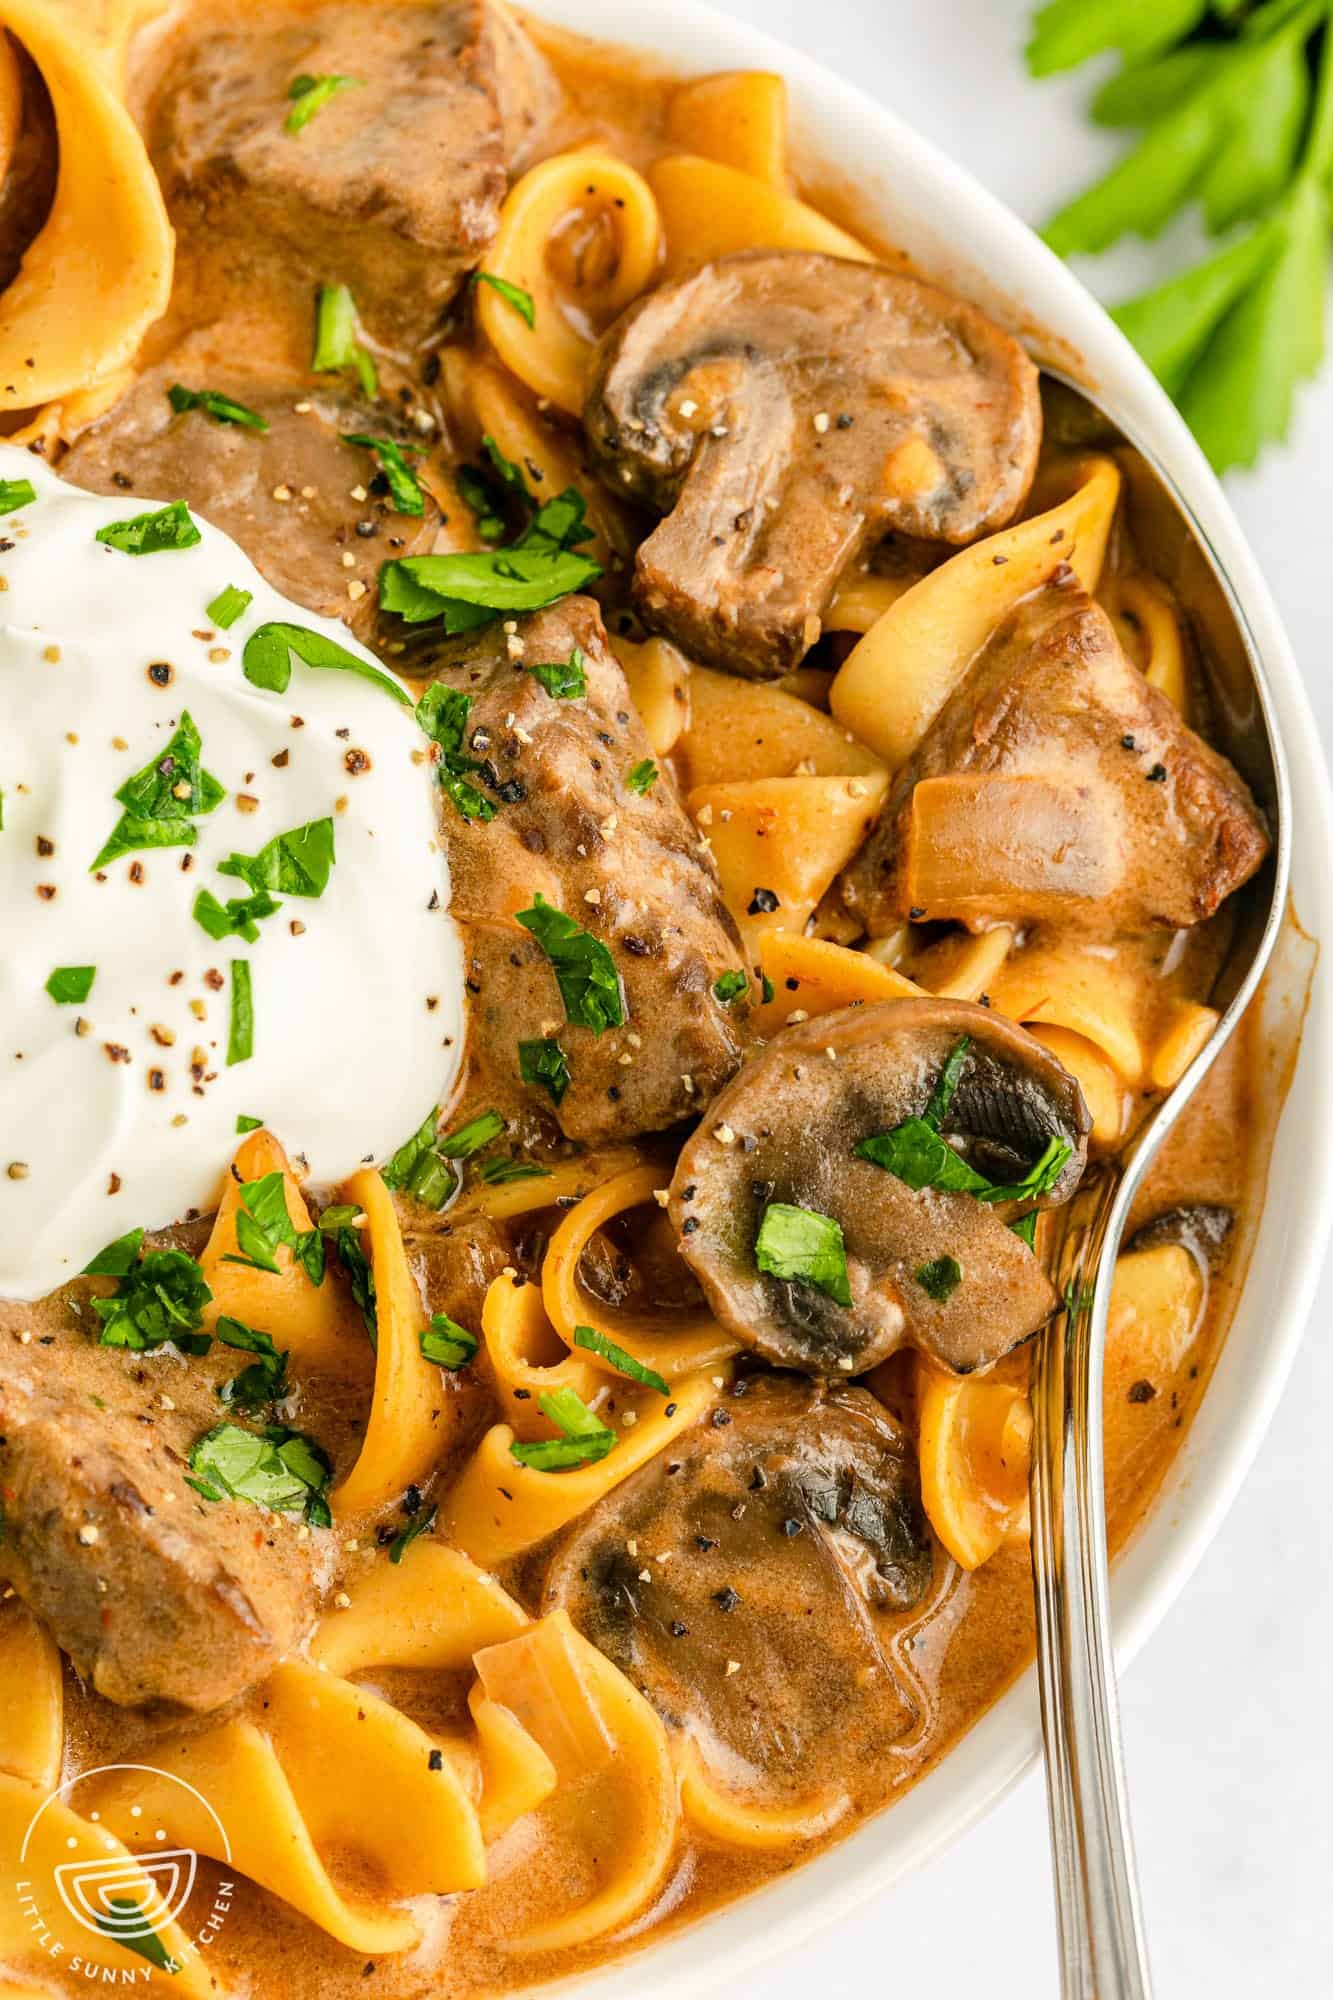 Closeup image of a bowl of soup with beef stroganoff, egg noodles, mushrooms, and sour cream topping.